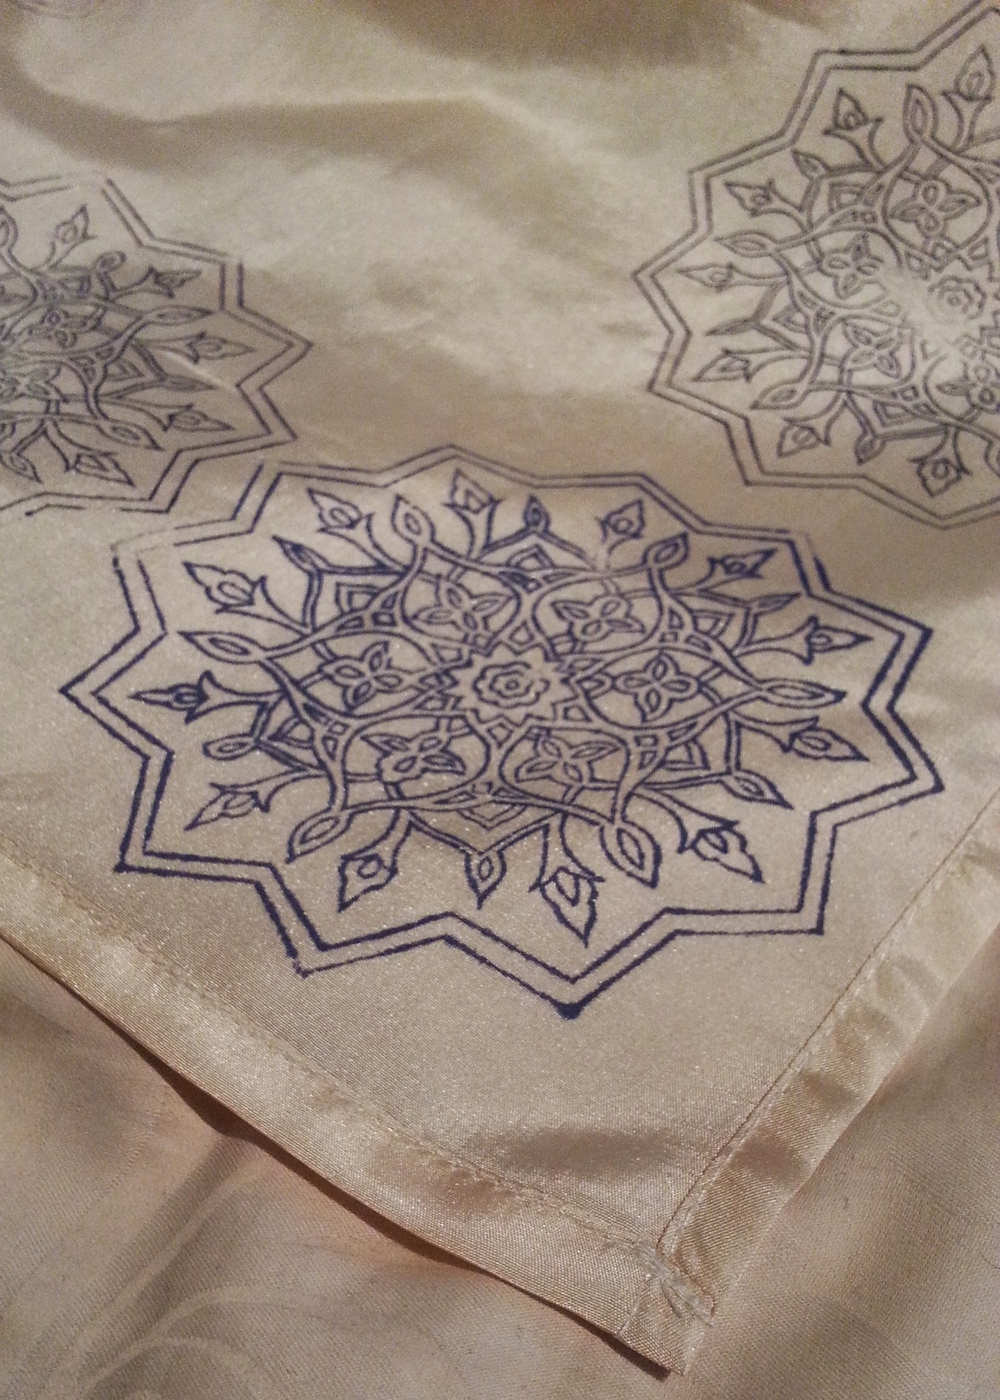 Persian Embroidery Patterns Gallery Skdesign